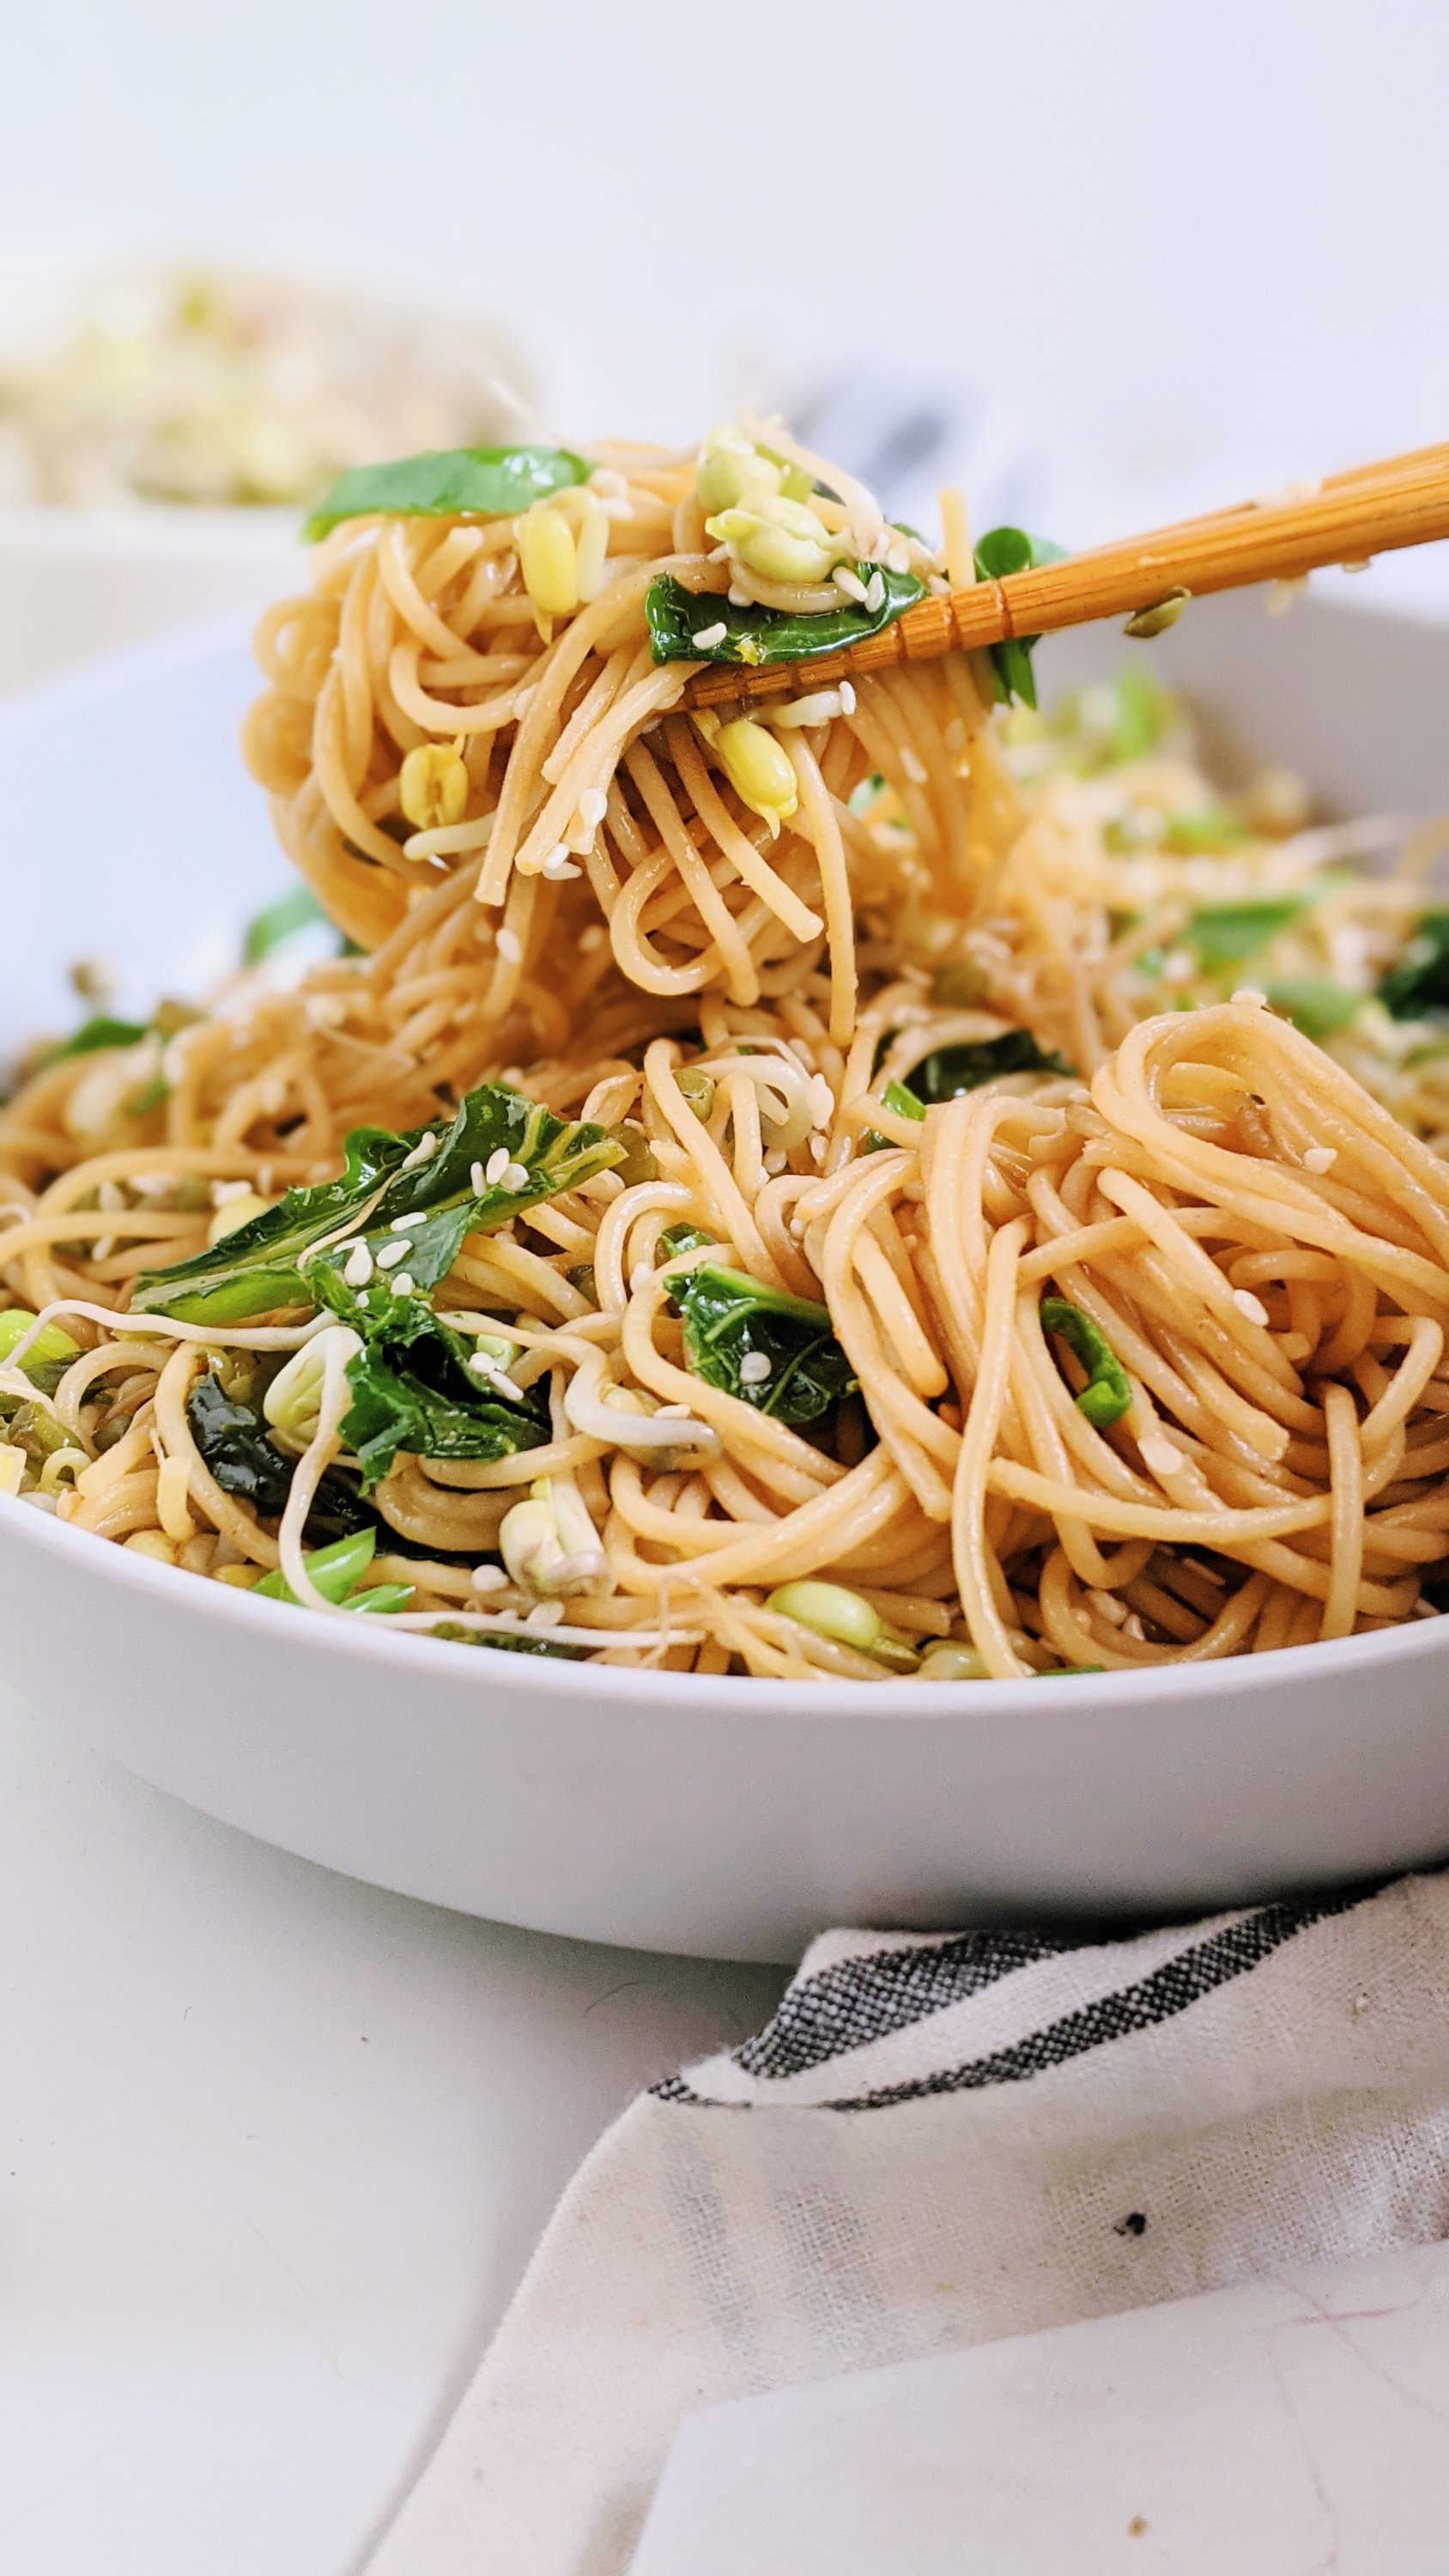 15 minute asian noodle stir fry noodles recipe vegan gluten free bean sprouts kale healthy plant based lunches or dinners gluten free